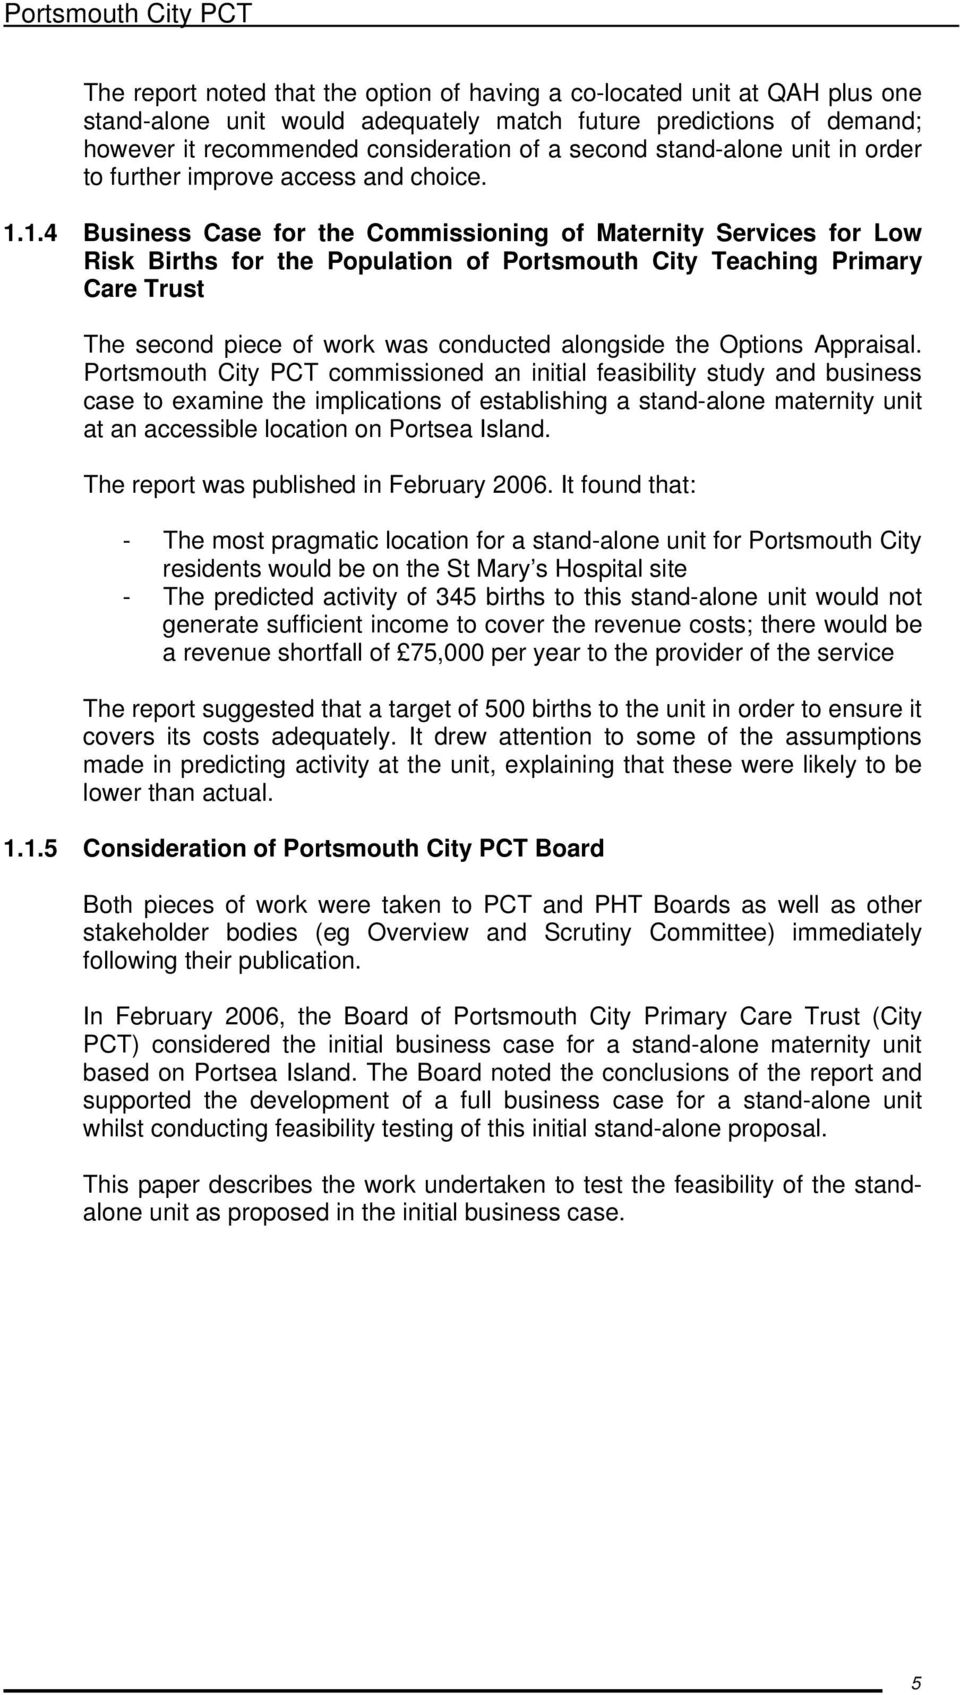 1.4 Business Case for the Commissioning of Maternity Services for Low Risk Births for the Population of Portsmouth City Teaching Primary Care Trust The second piece of work was conducted alongside